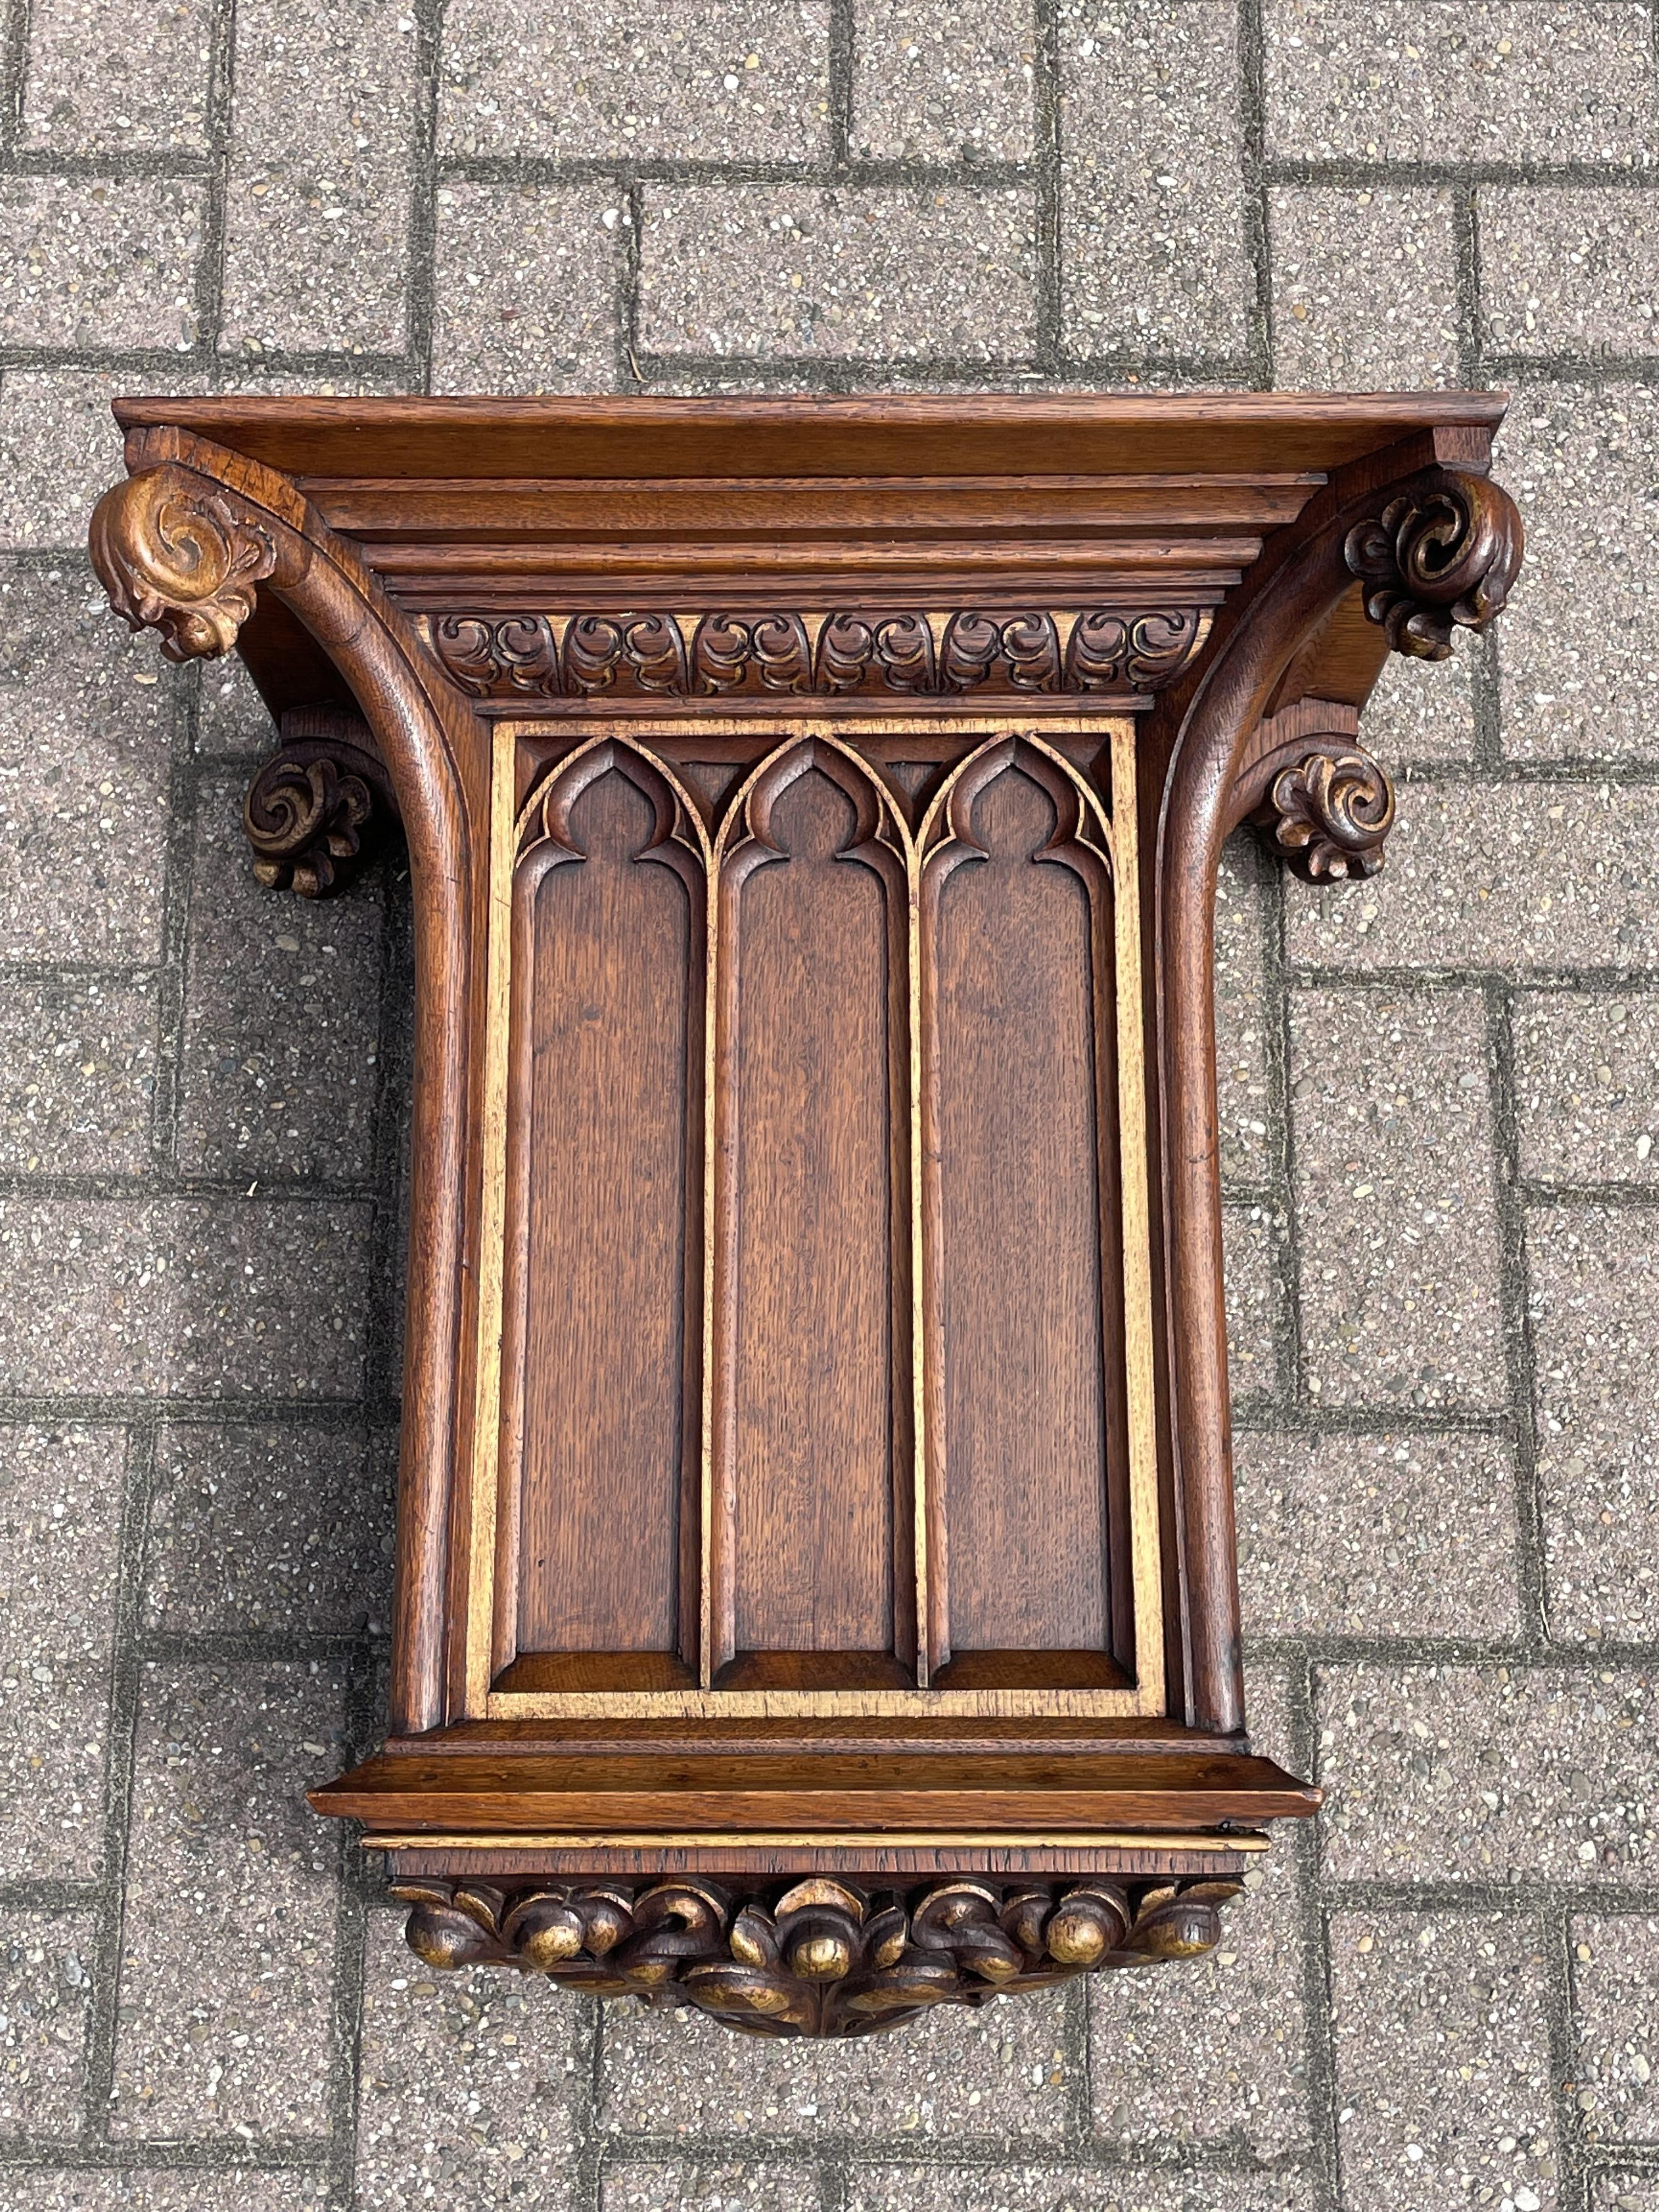 Oak Antique Hand Carved Gothic Revival Church Wall Bracket / Saint Statue Console